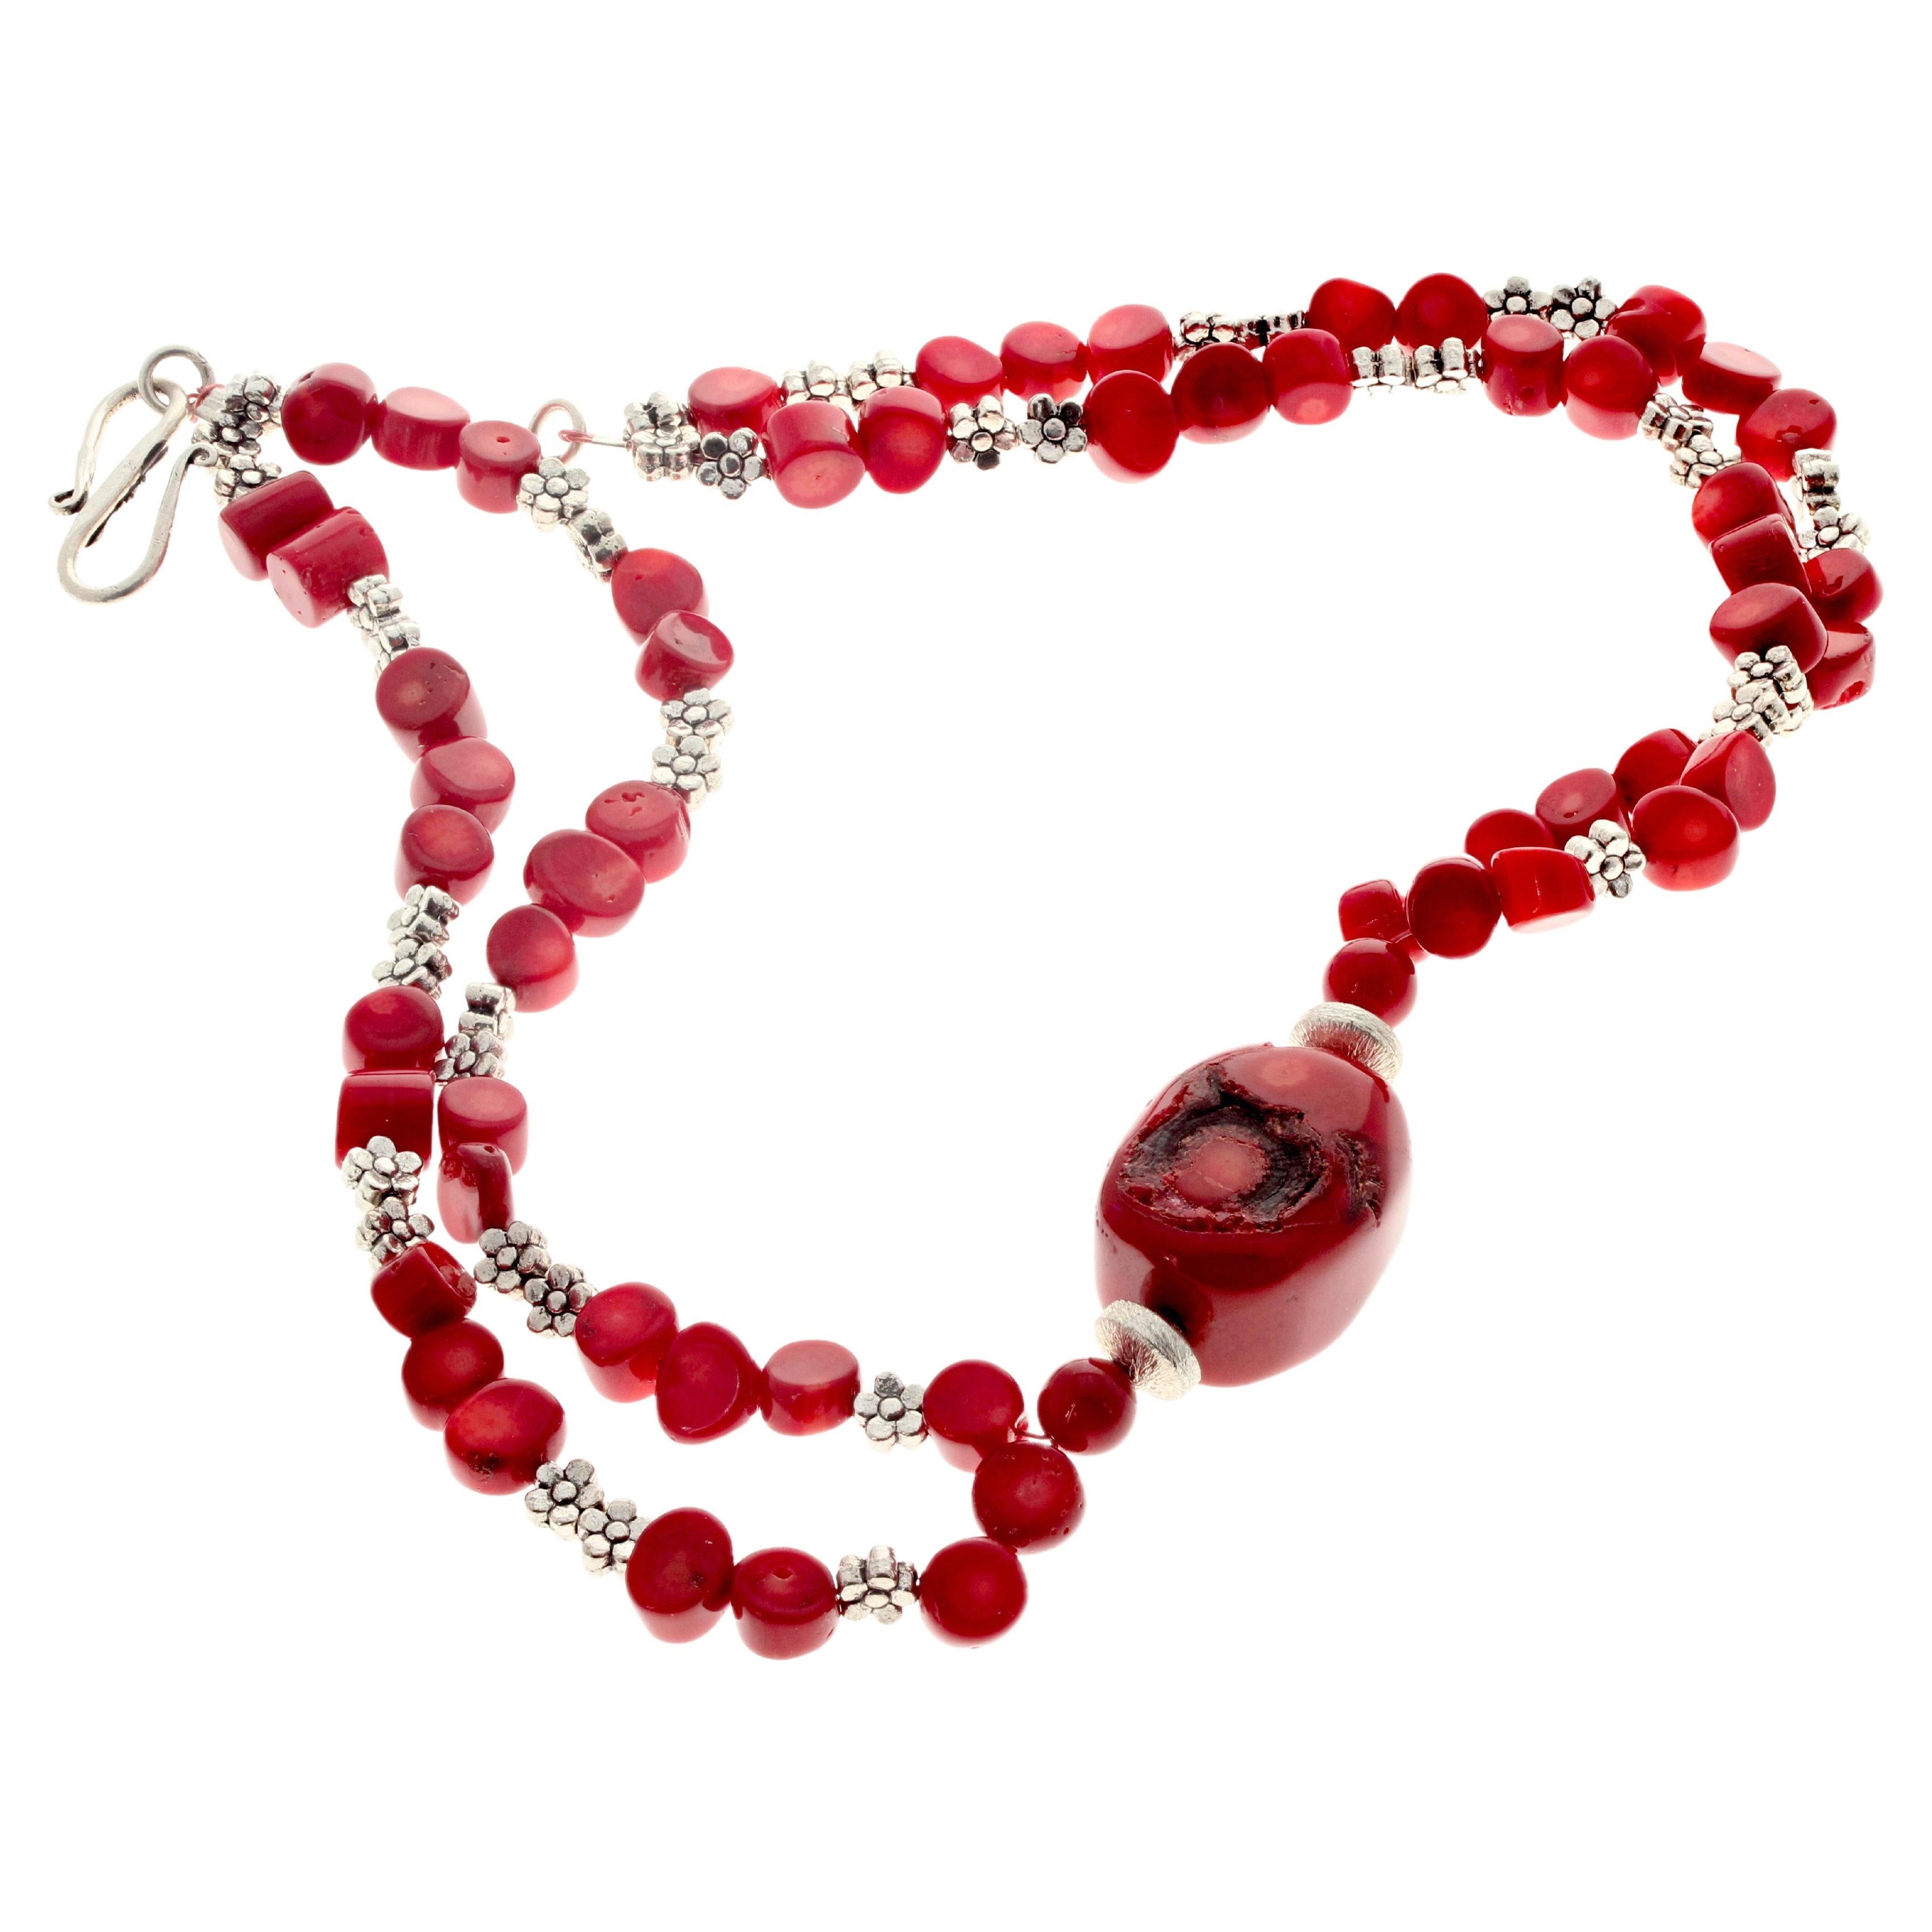 Please note that although this is a 15 1/2 inches long double strand necklace it is happy and elegant.  The center natural Red Coral is 25mm x 20mm.  The natural little Coral rondels are different sizes the largest ones being approximately 9mm.  The